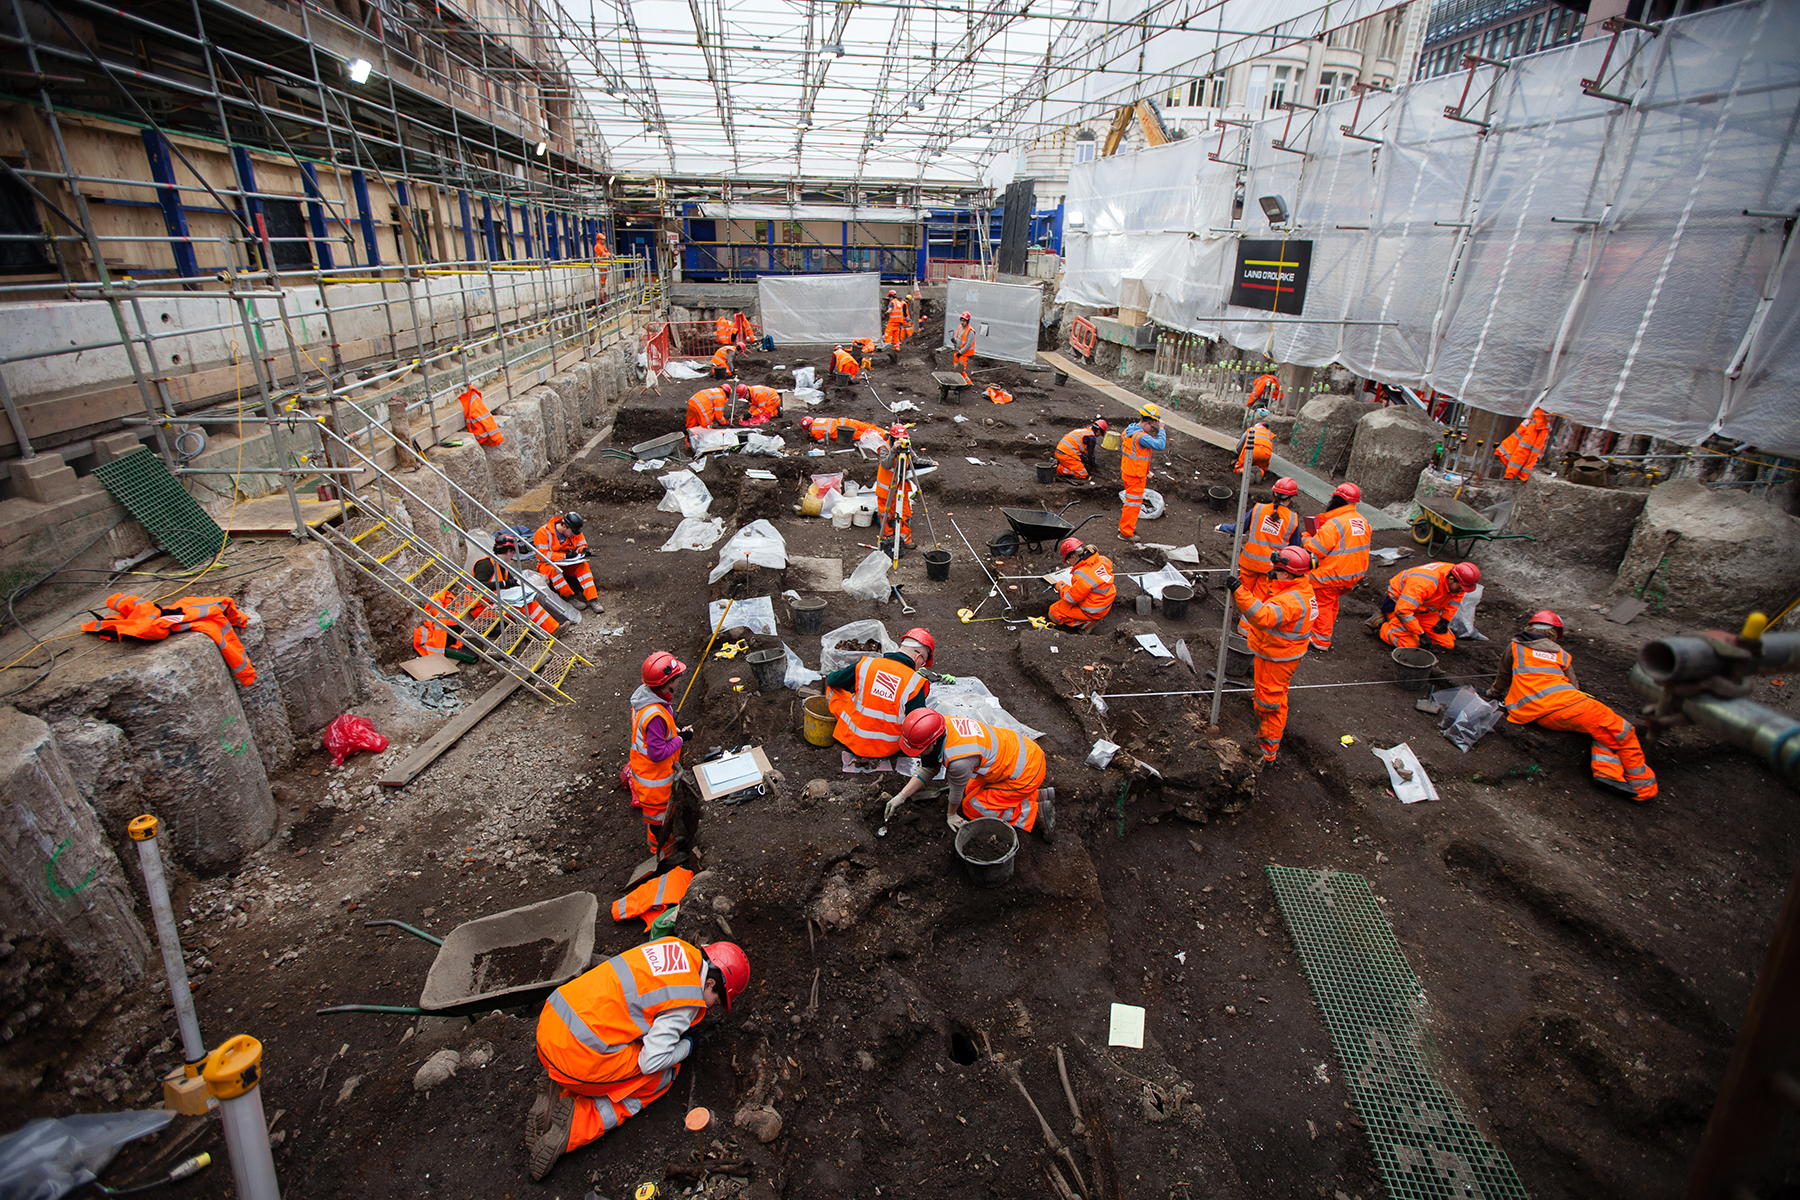 Within a month of discovering the first body at the Bedlam burial ground, dozens of archaeologists worked to excavate this piece of London’s archaeological history. (Image courtesy of Transport for London)